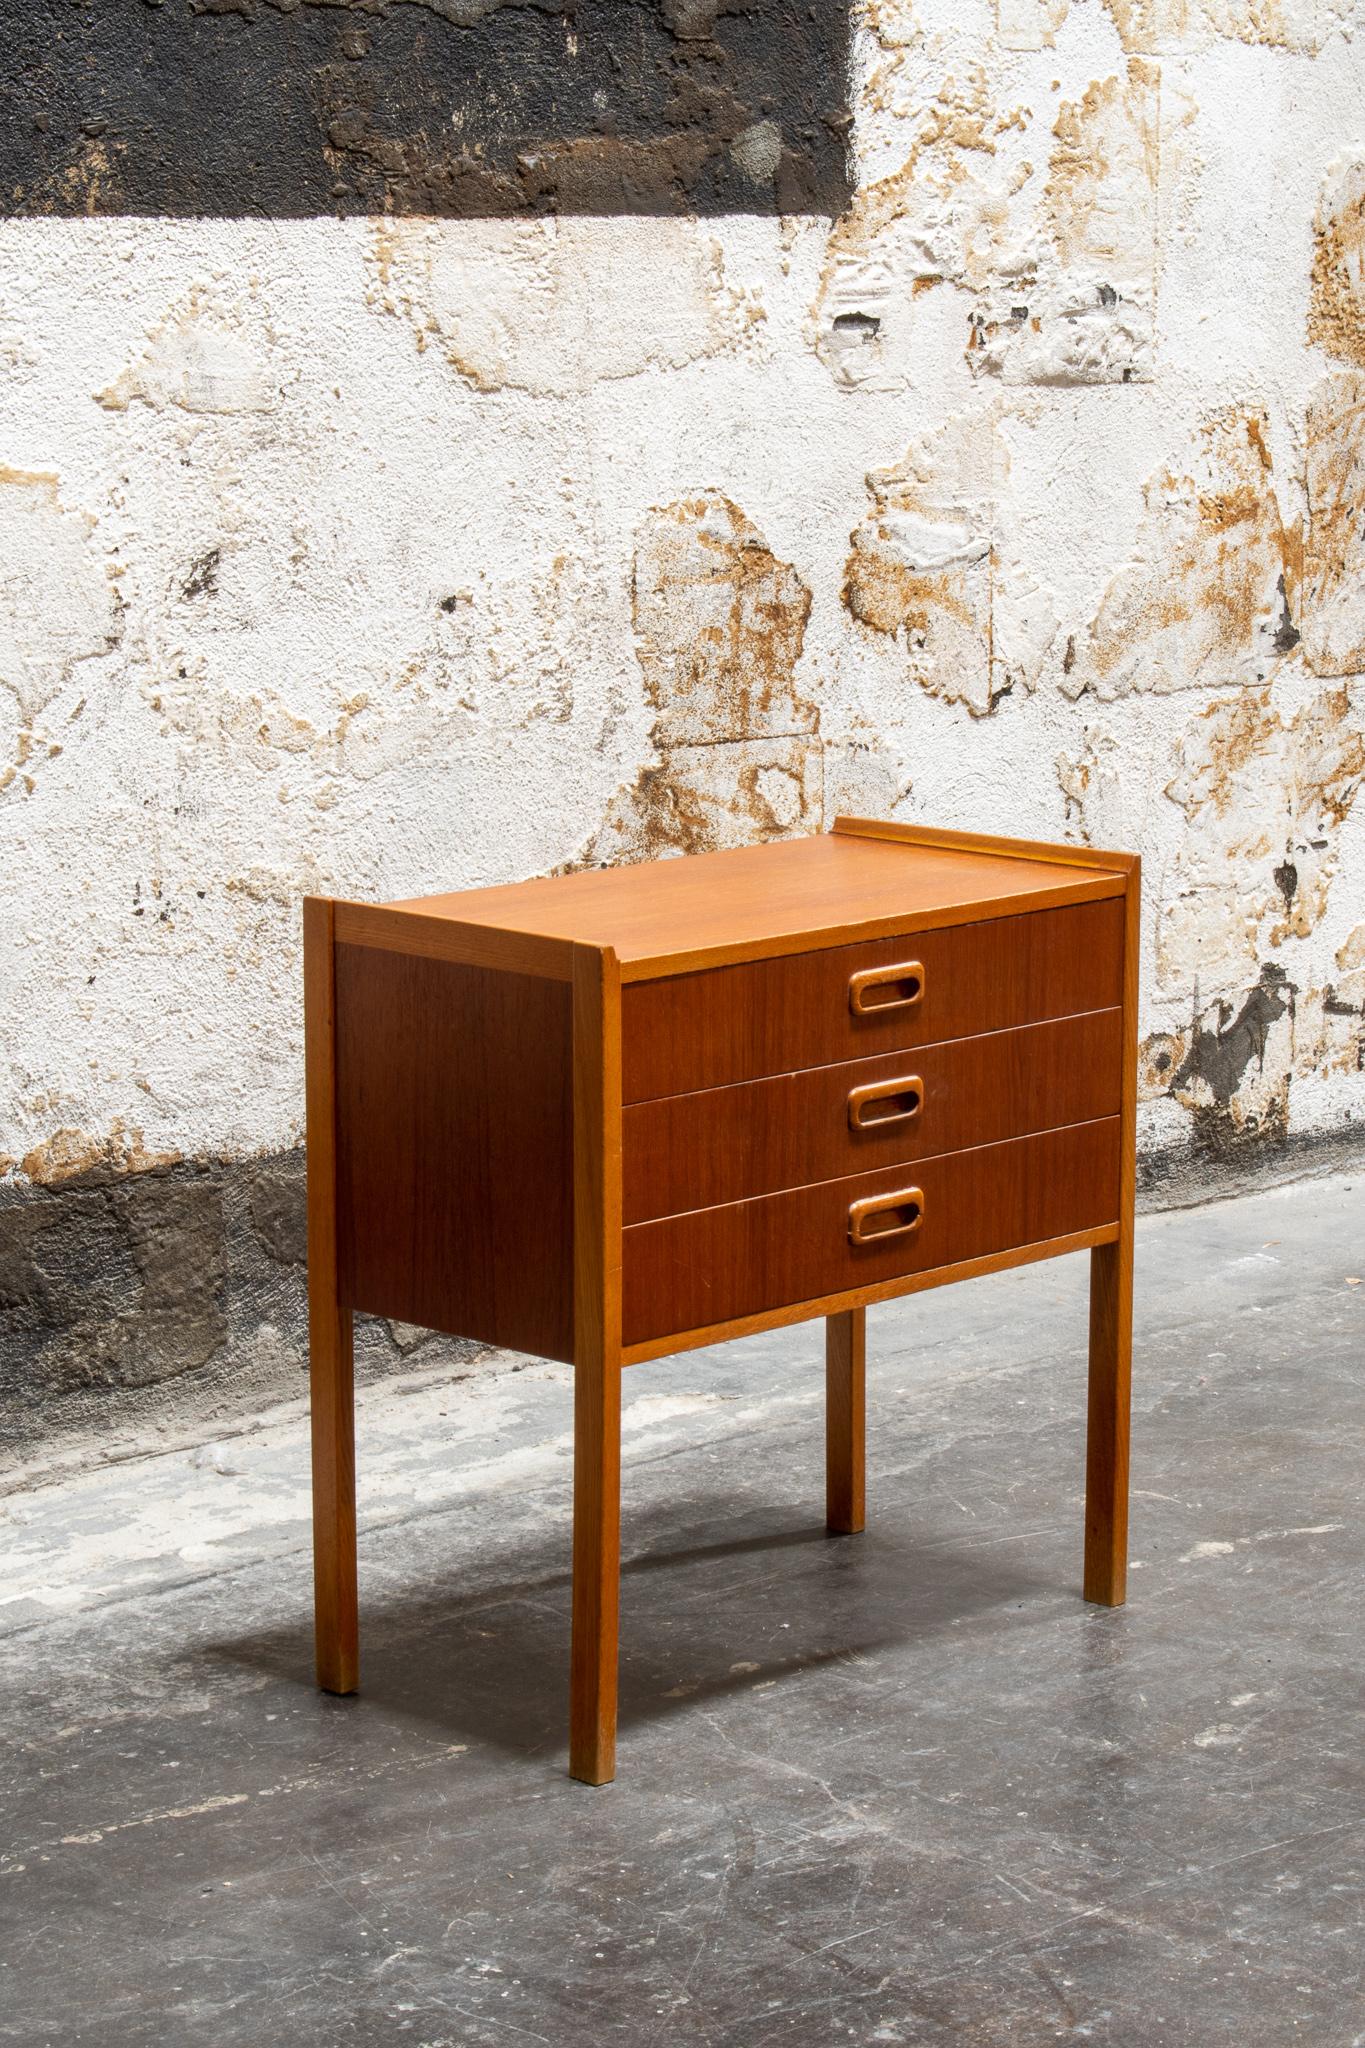 Perfectly mid-century little chest of drawers from Sweden. Made of teak and featuring organic-shaped drawer pulls, this small piece would work wonderfully as a nightstand or side table with storage.